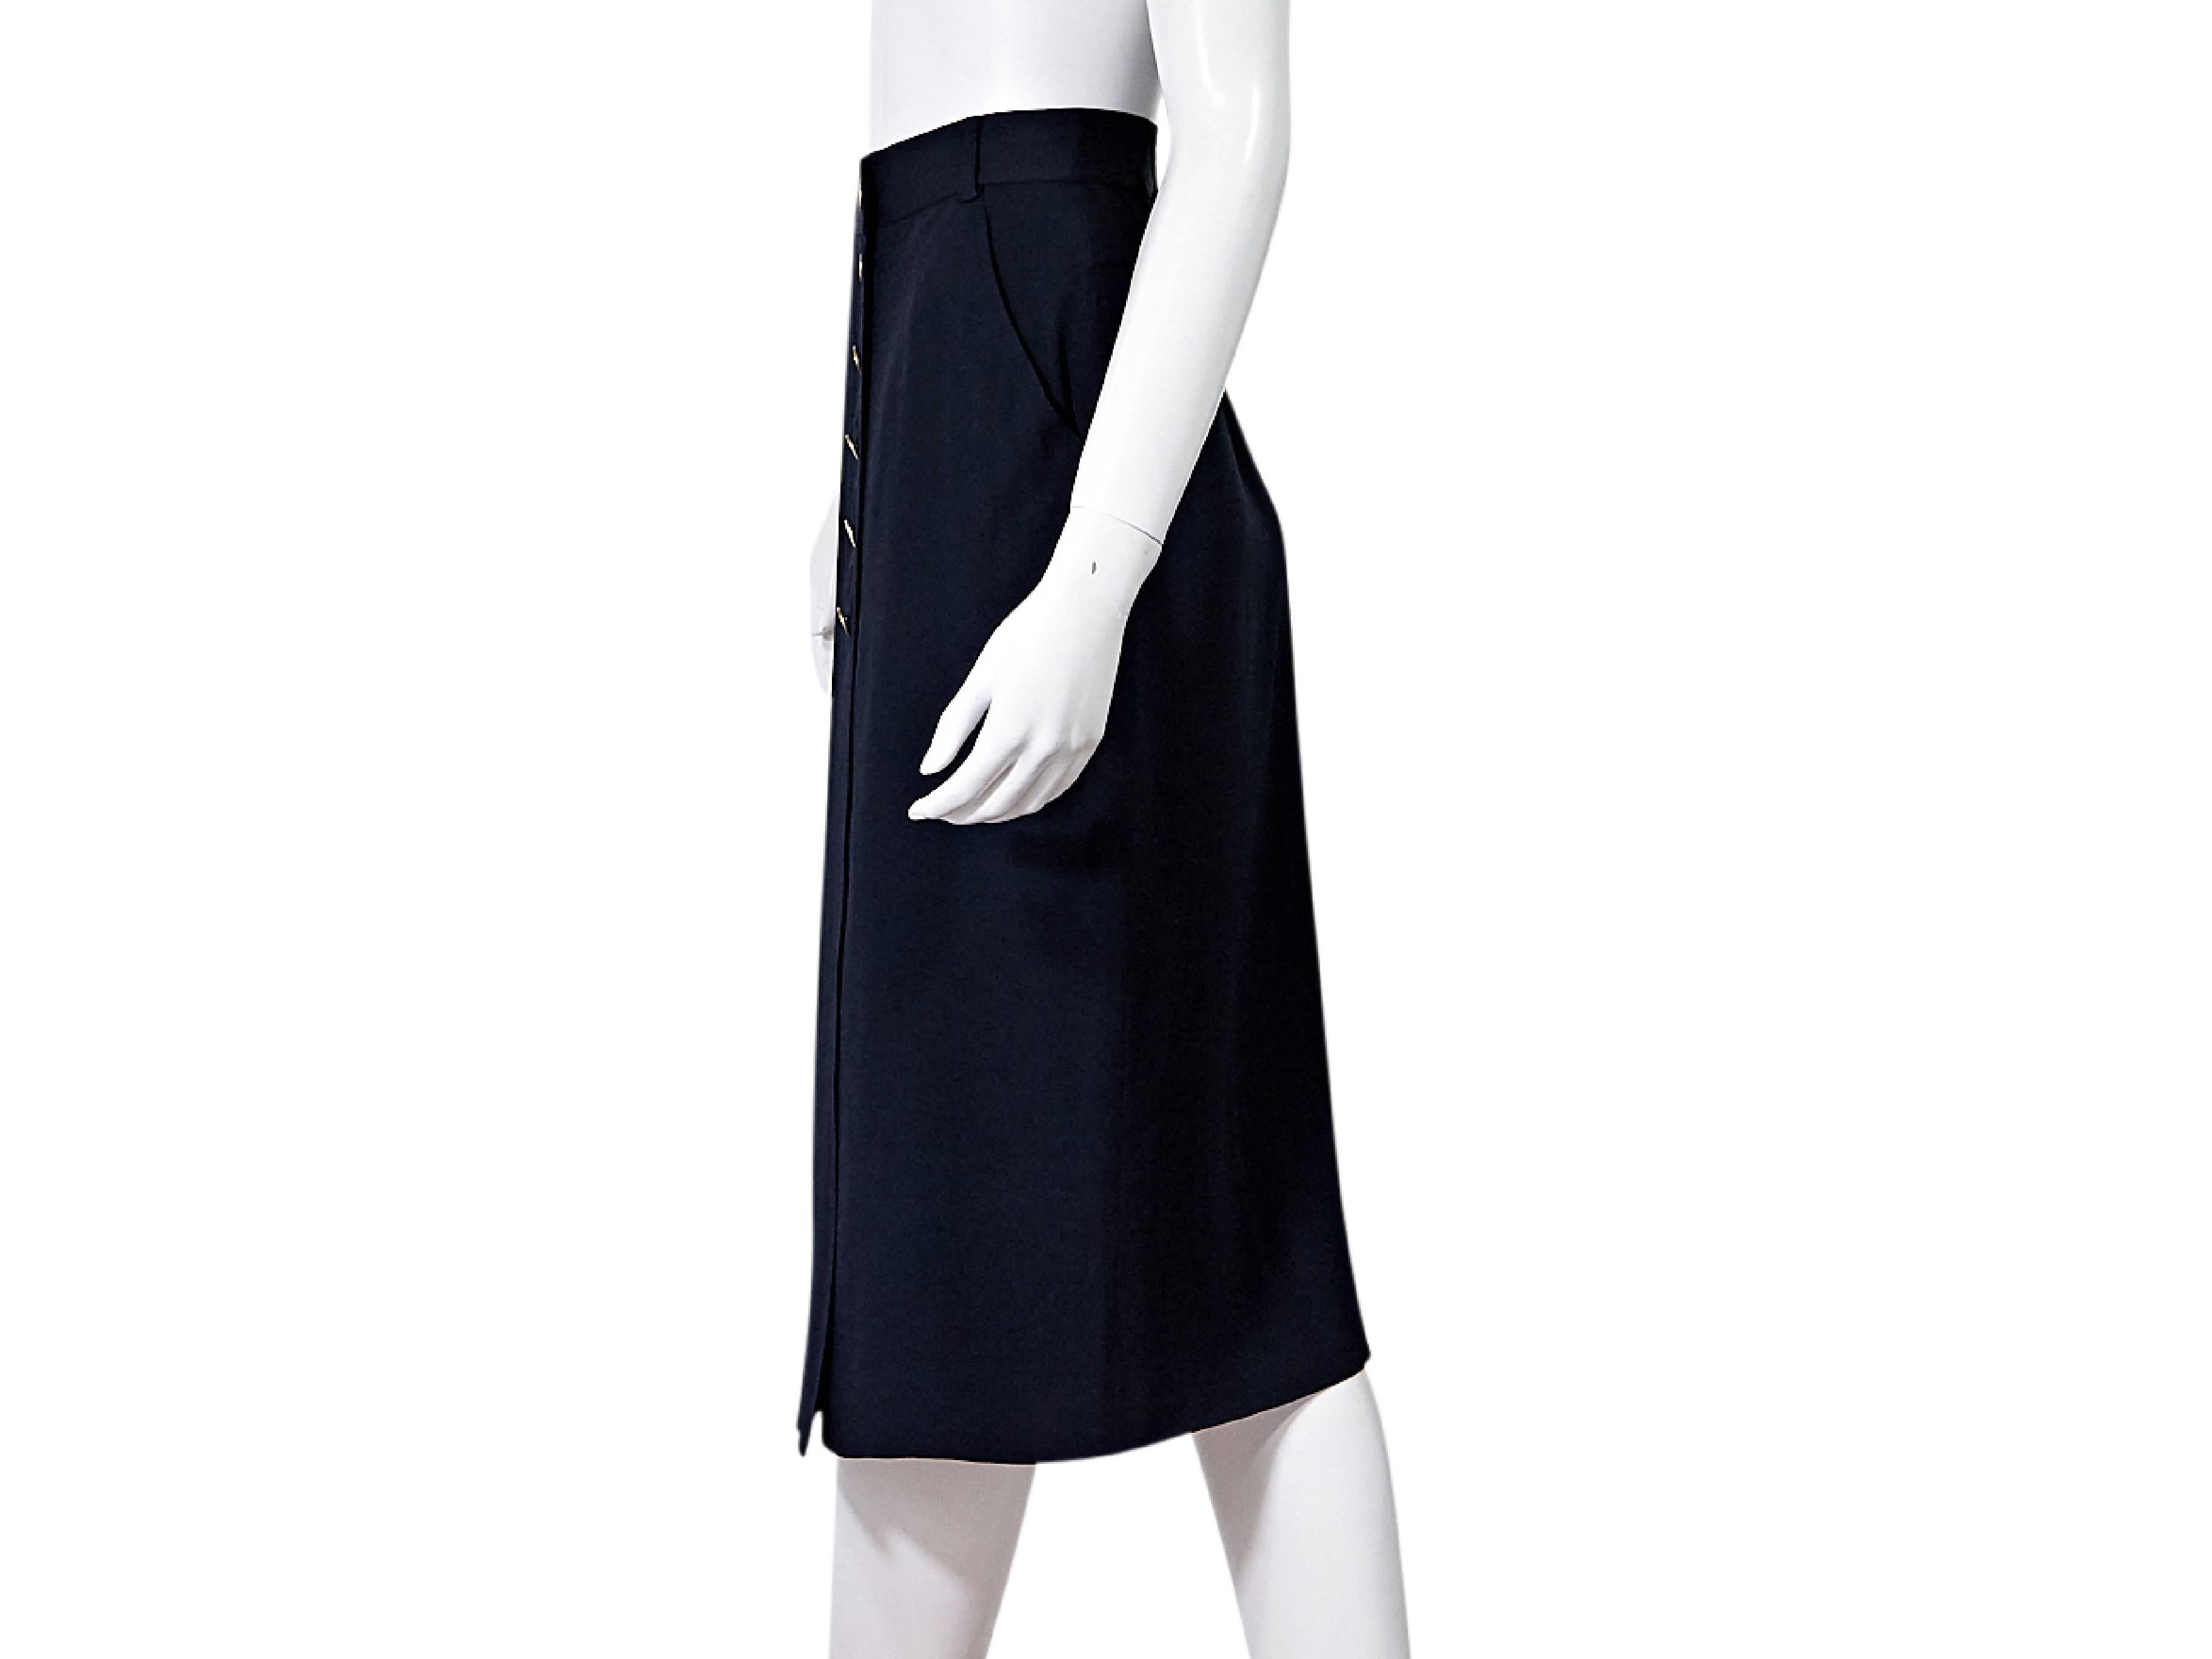 Product details:  Navy blue silk pencil skirt by Chanel.  Banded waist with belt loops.  Button-front closure. Size M
Condition: Pre-owned. Very good.

Est. Retail $ 898.00